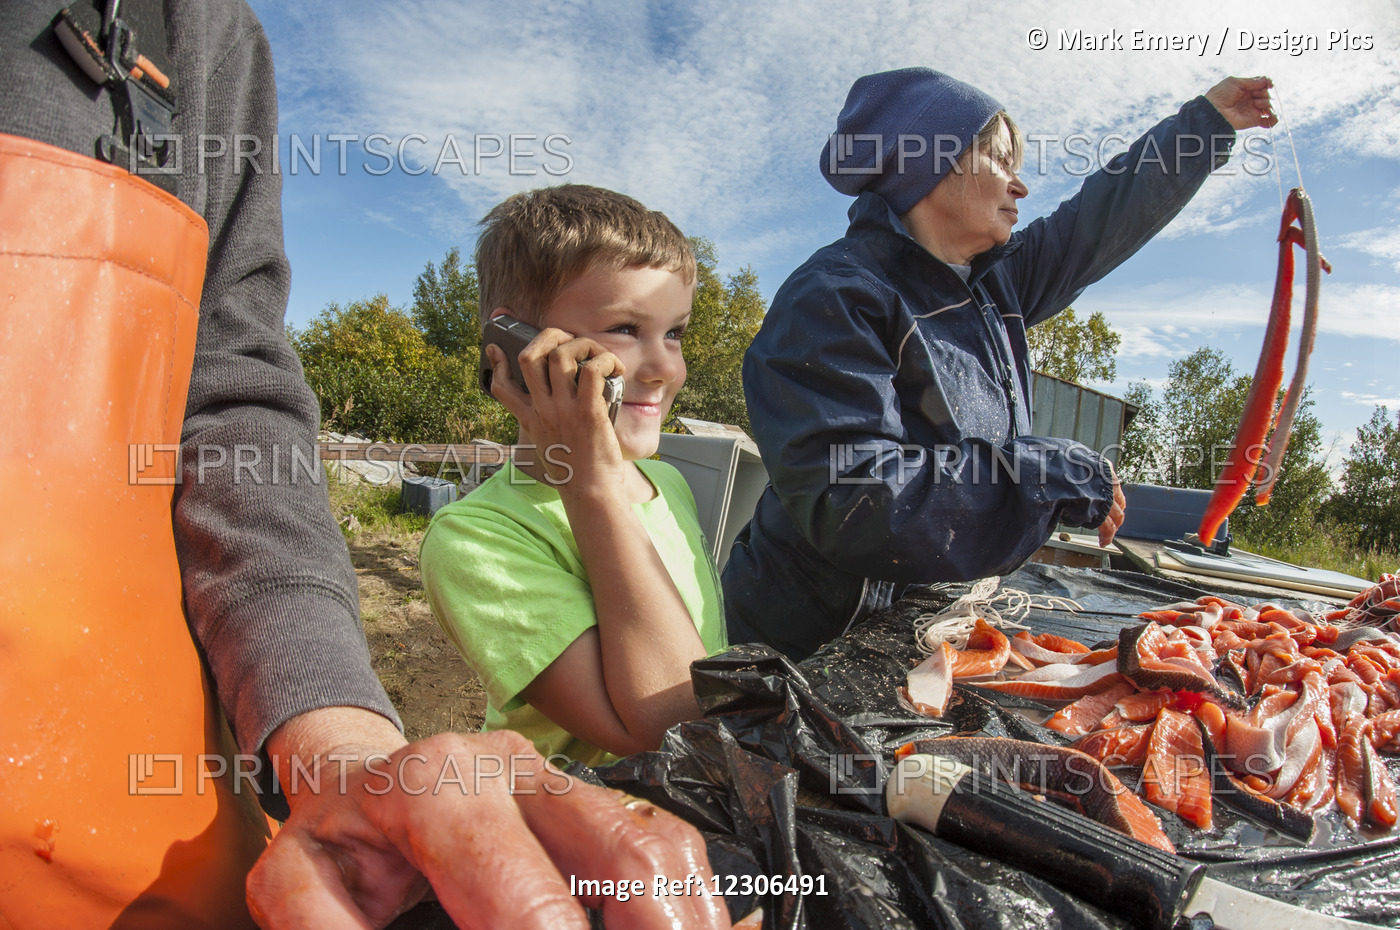 Young Boy Talks On A Cell Phone While Adults Filet And Hang Caught Salmon, ...